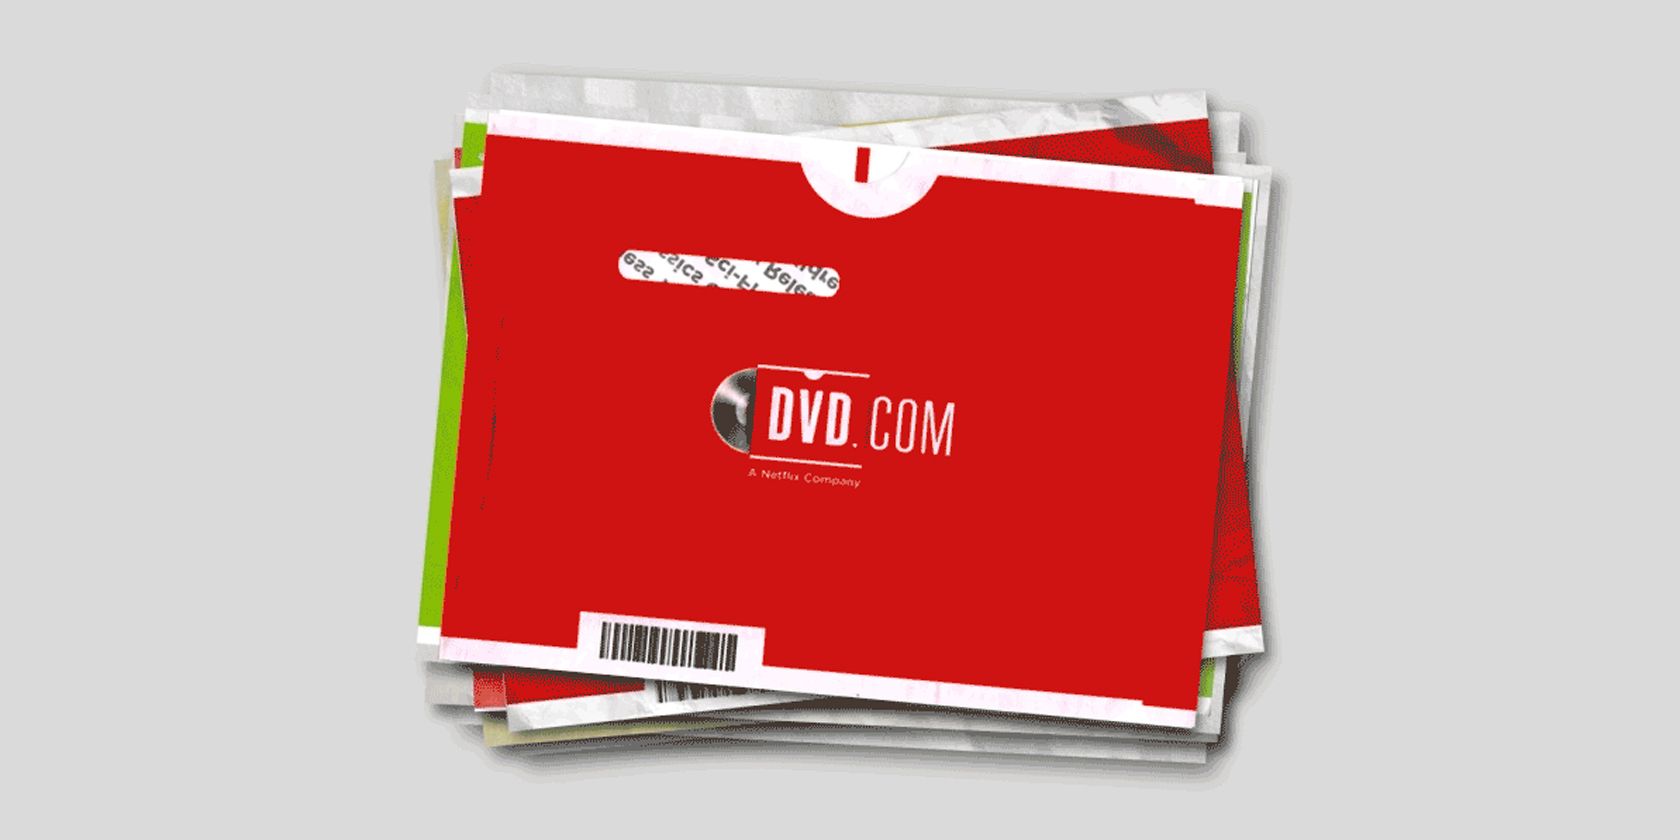 DVD package from DVD-com